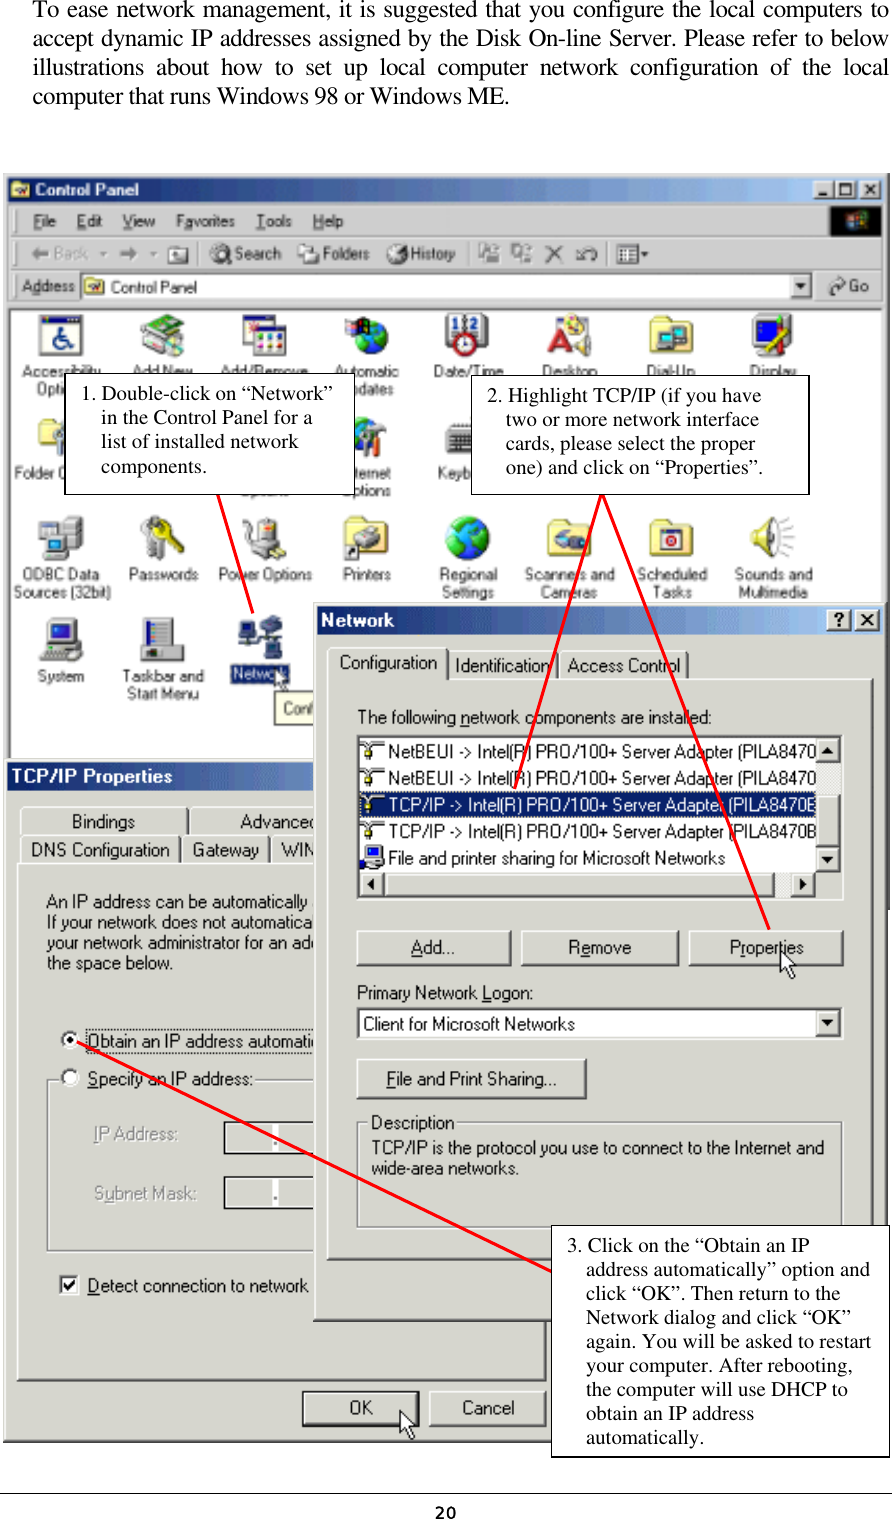   20To ease network management, it is suggested that you configure the local computers to accept dynamic IP addresses assigned by the Disk On-line Server. Please refer to below illustrations about how to set up local computer network configuration of the local computer that runs Windows 98 or Windows ME.                                               1. Double-click on “Network” in the Control Panel for a list of installed network components. 2. Highlight TCP/IP (if you have two or more network interface cards, please select the proper one) and click on “Properties”. 3. Click on the “Obtain an IP address automatically” option and click “OK”. Then return to the Network dialog and click “OK” again. You will be asked to restartyour computer. After rebooting, the computer will use DHCP to obtain an IP address automatically. 